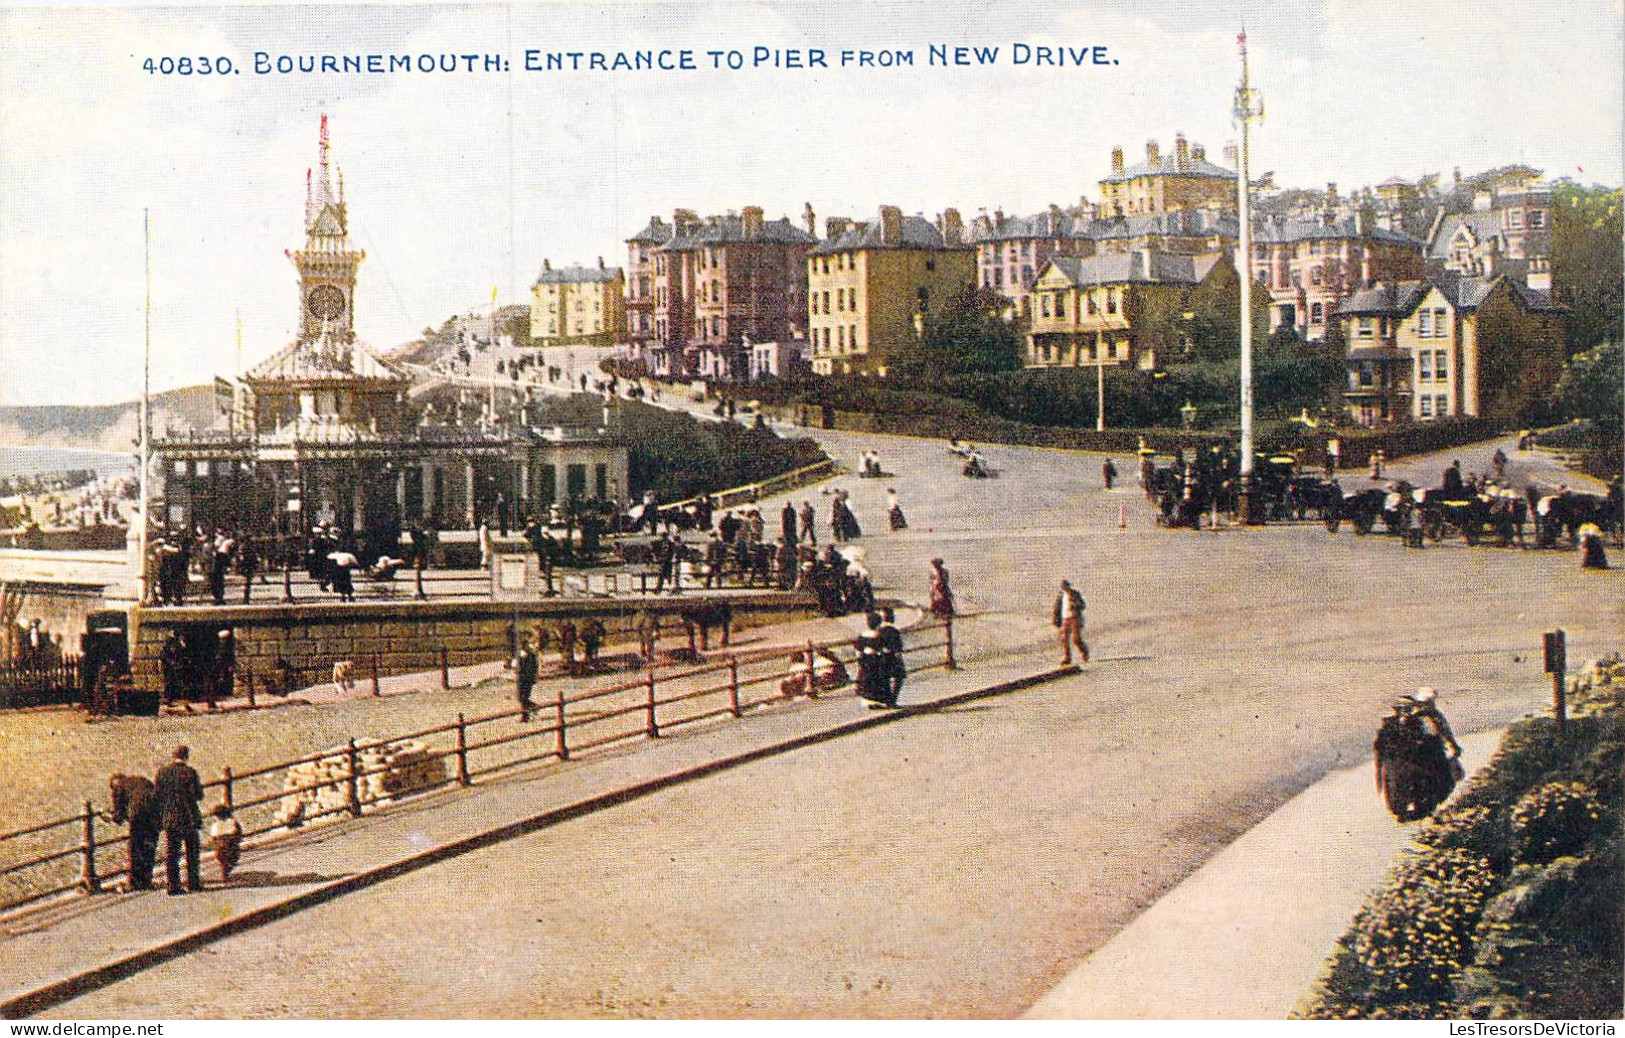 ANGLETERRE - Bournemouth - Entrance To Pier From New Drive - Carte Postale Ancienne - Bournemouth (vanaf 1972)